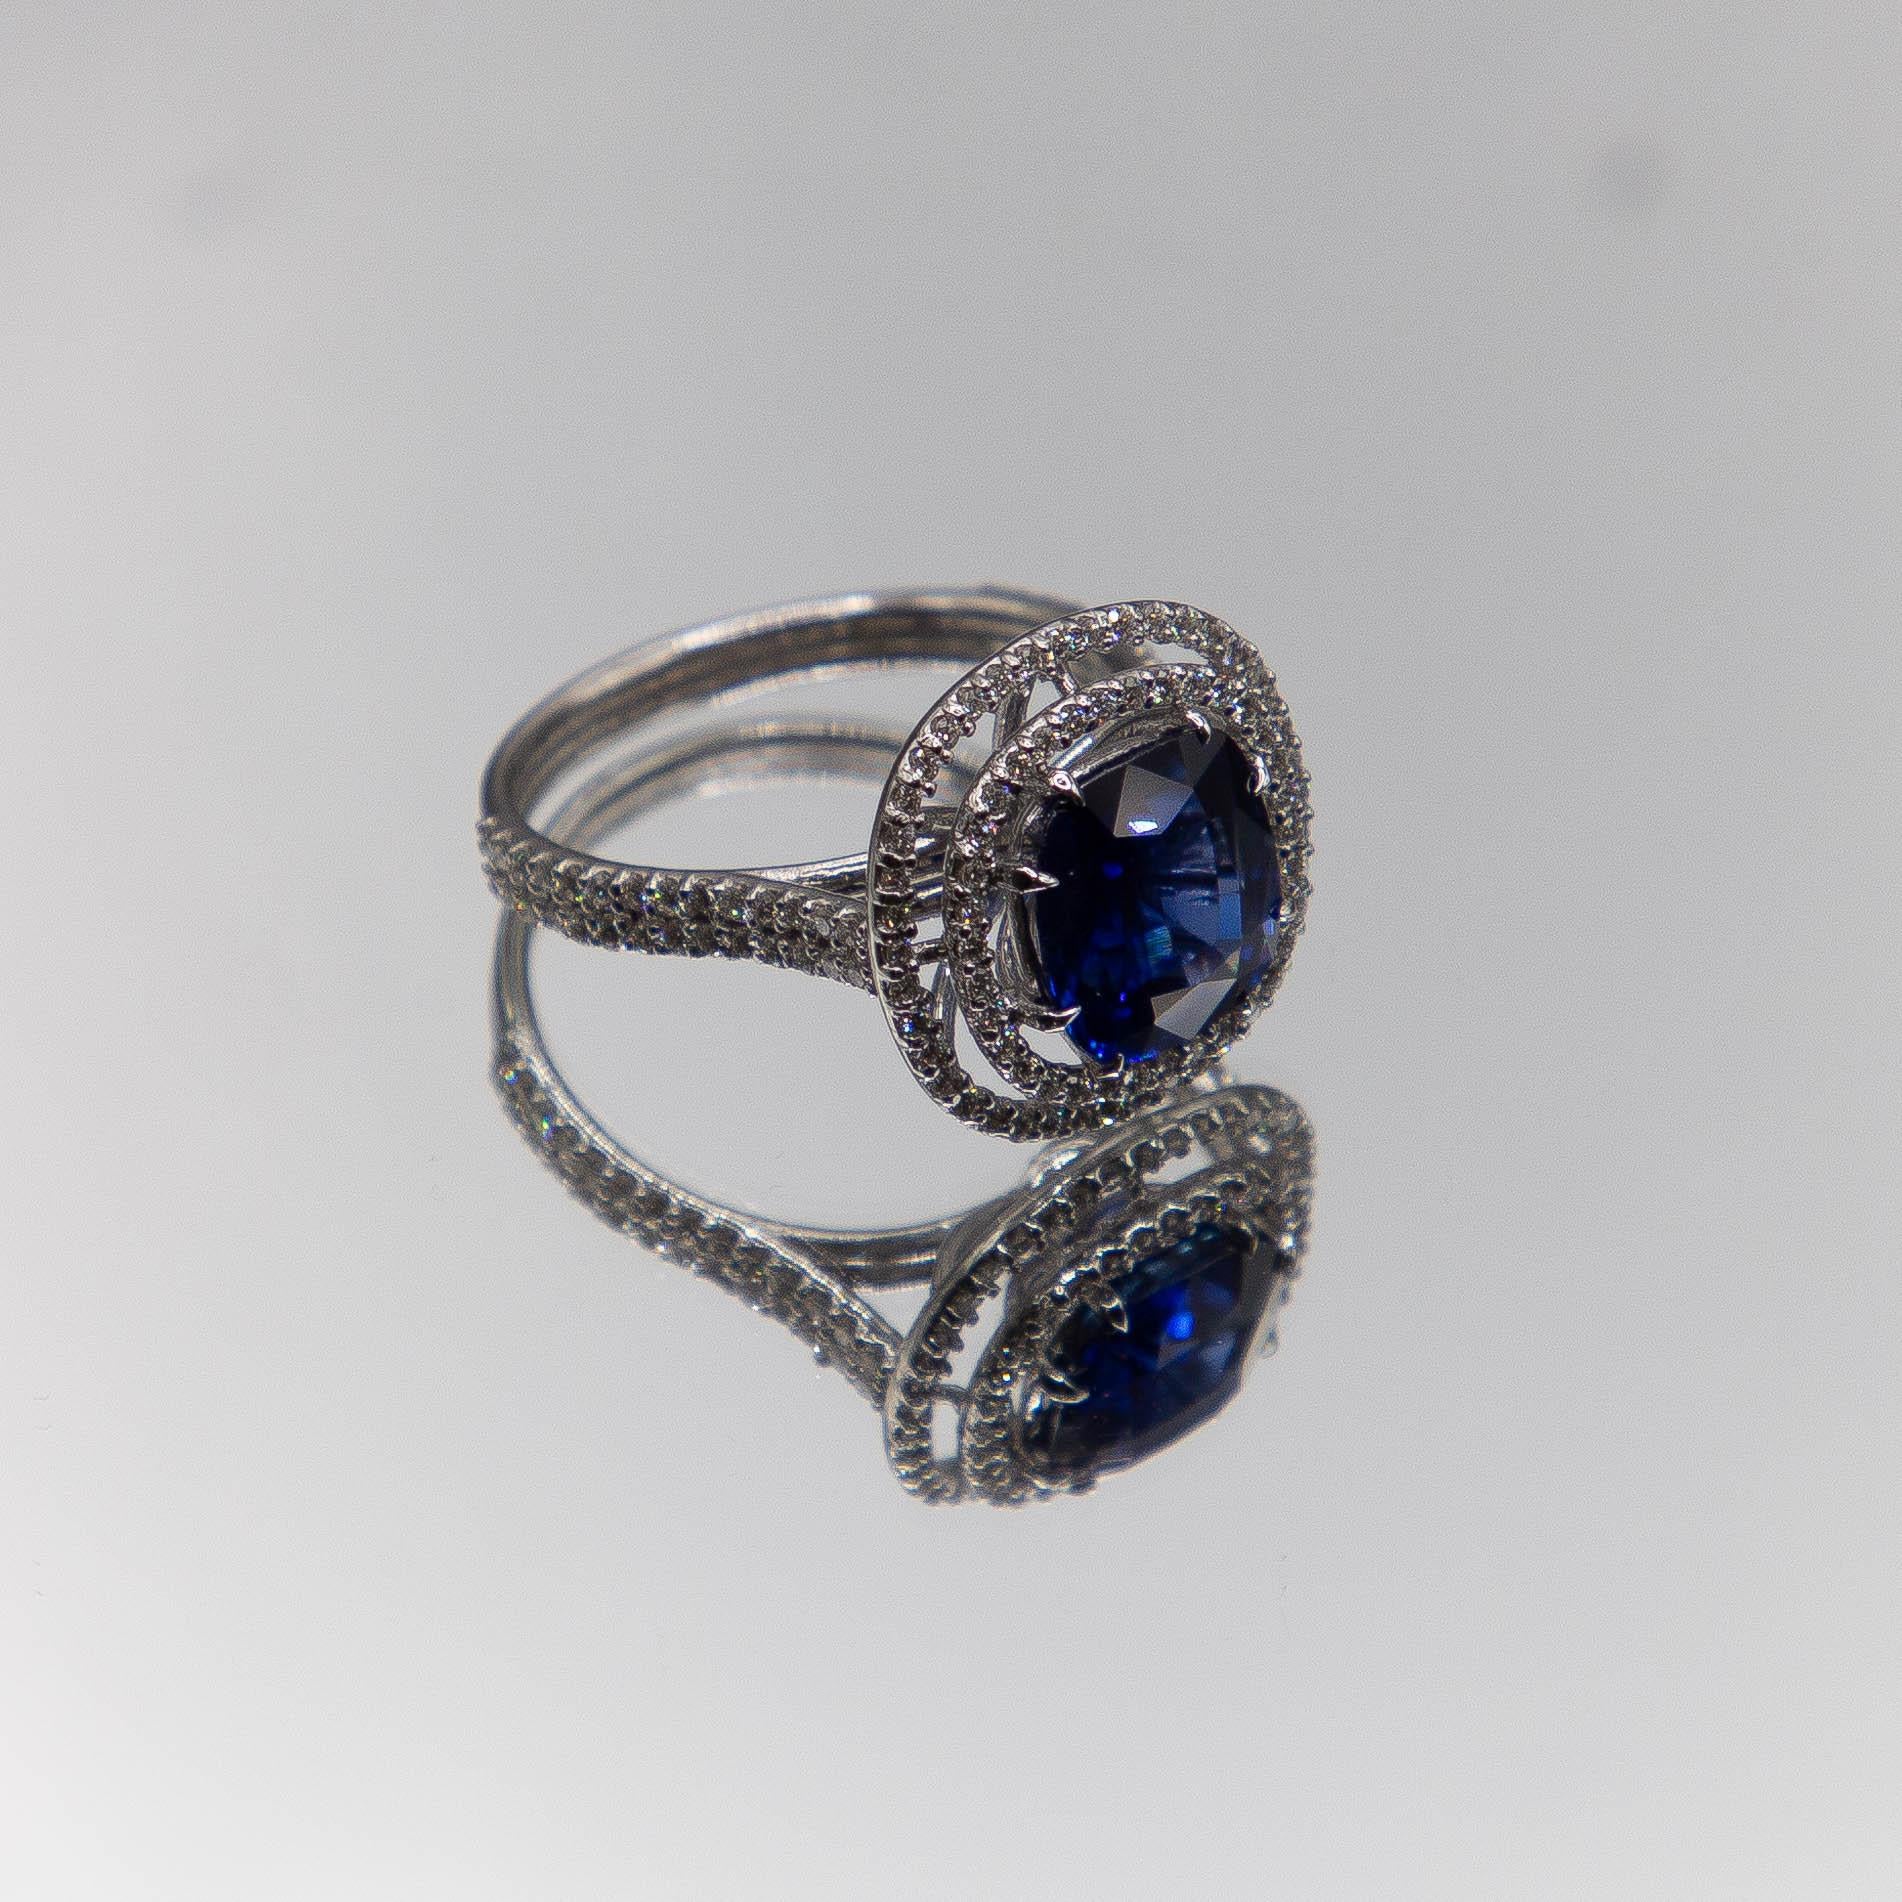 18k White Gold Halo/ Intense Blue Sapphire 6.39 Carats/ 132 Diamonds 0.66 Cts For Sale 2